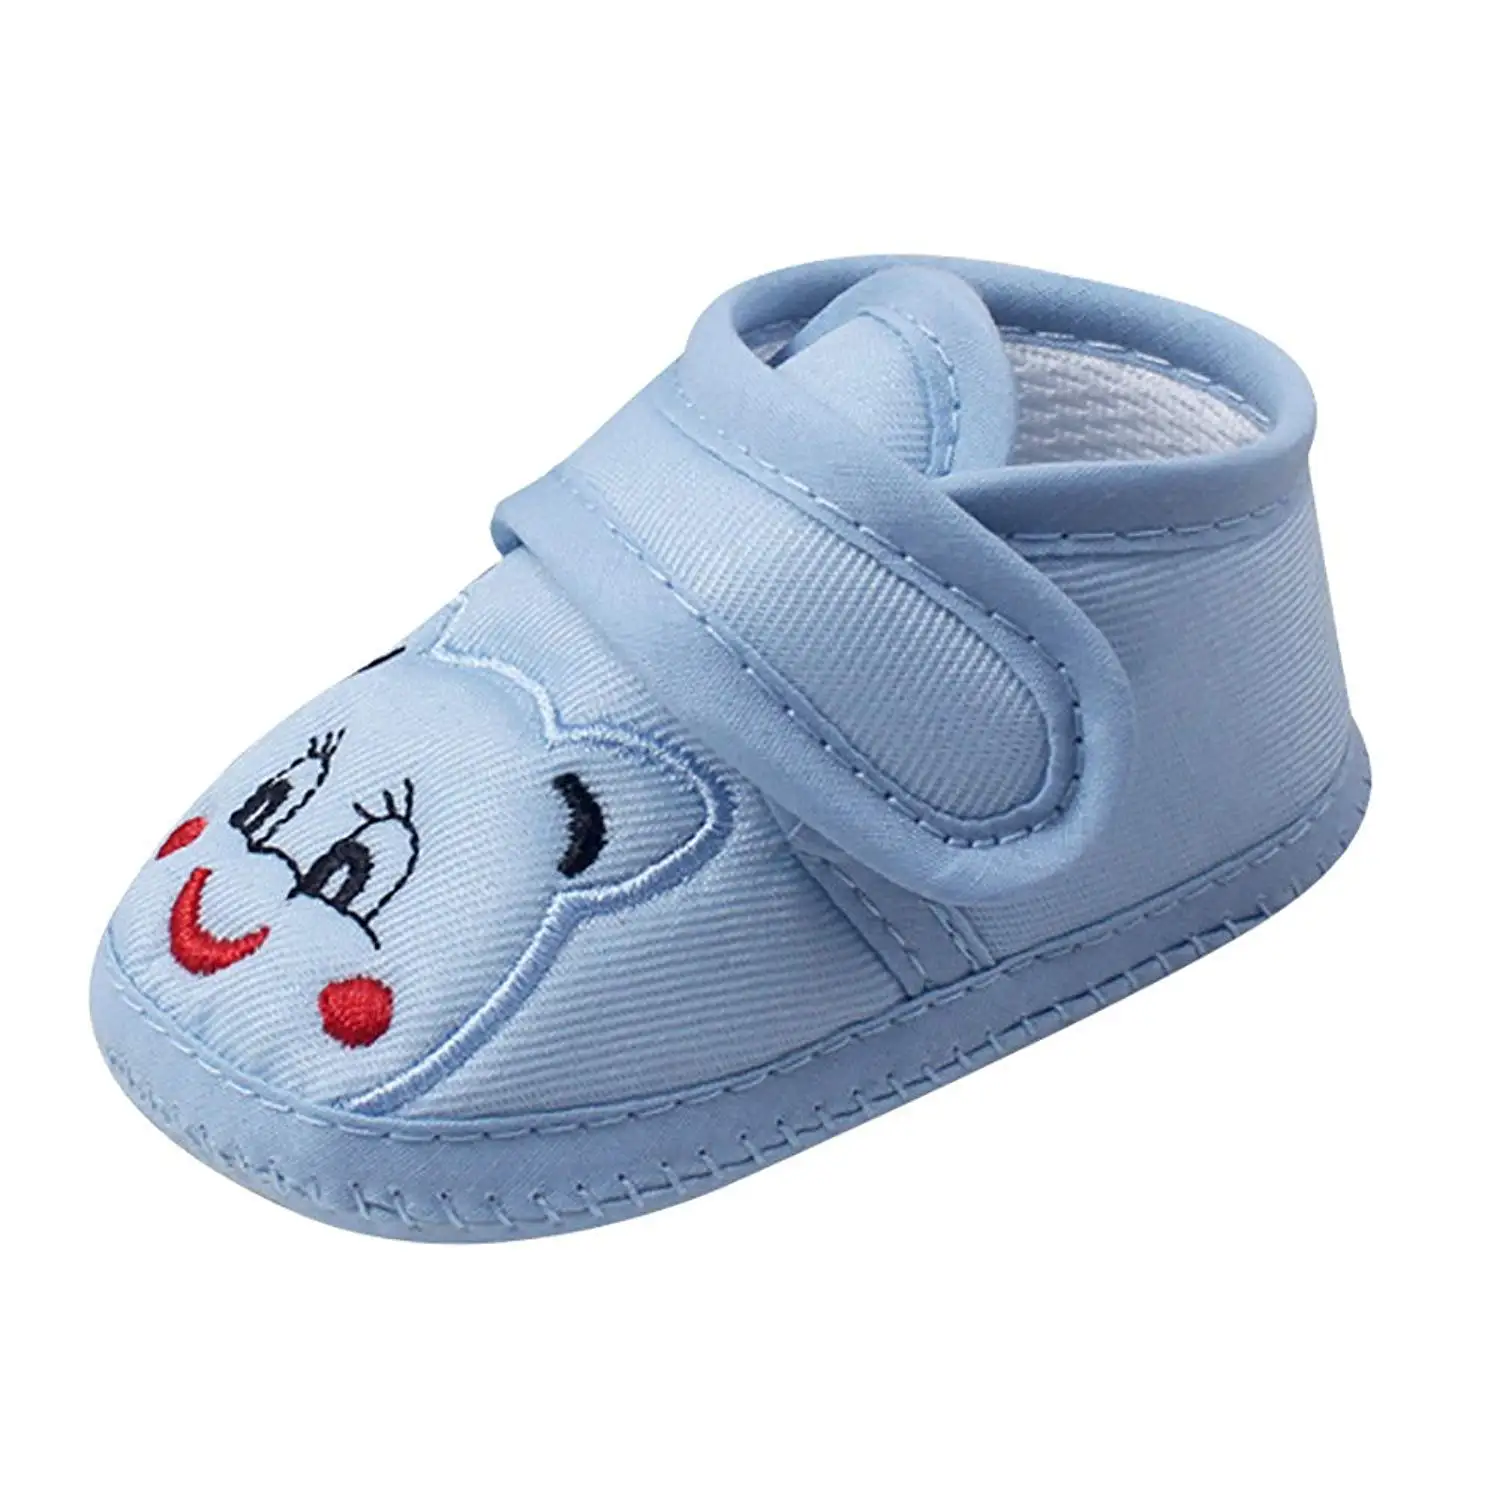 shoes for 18 month old girl